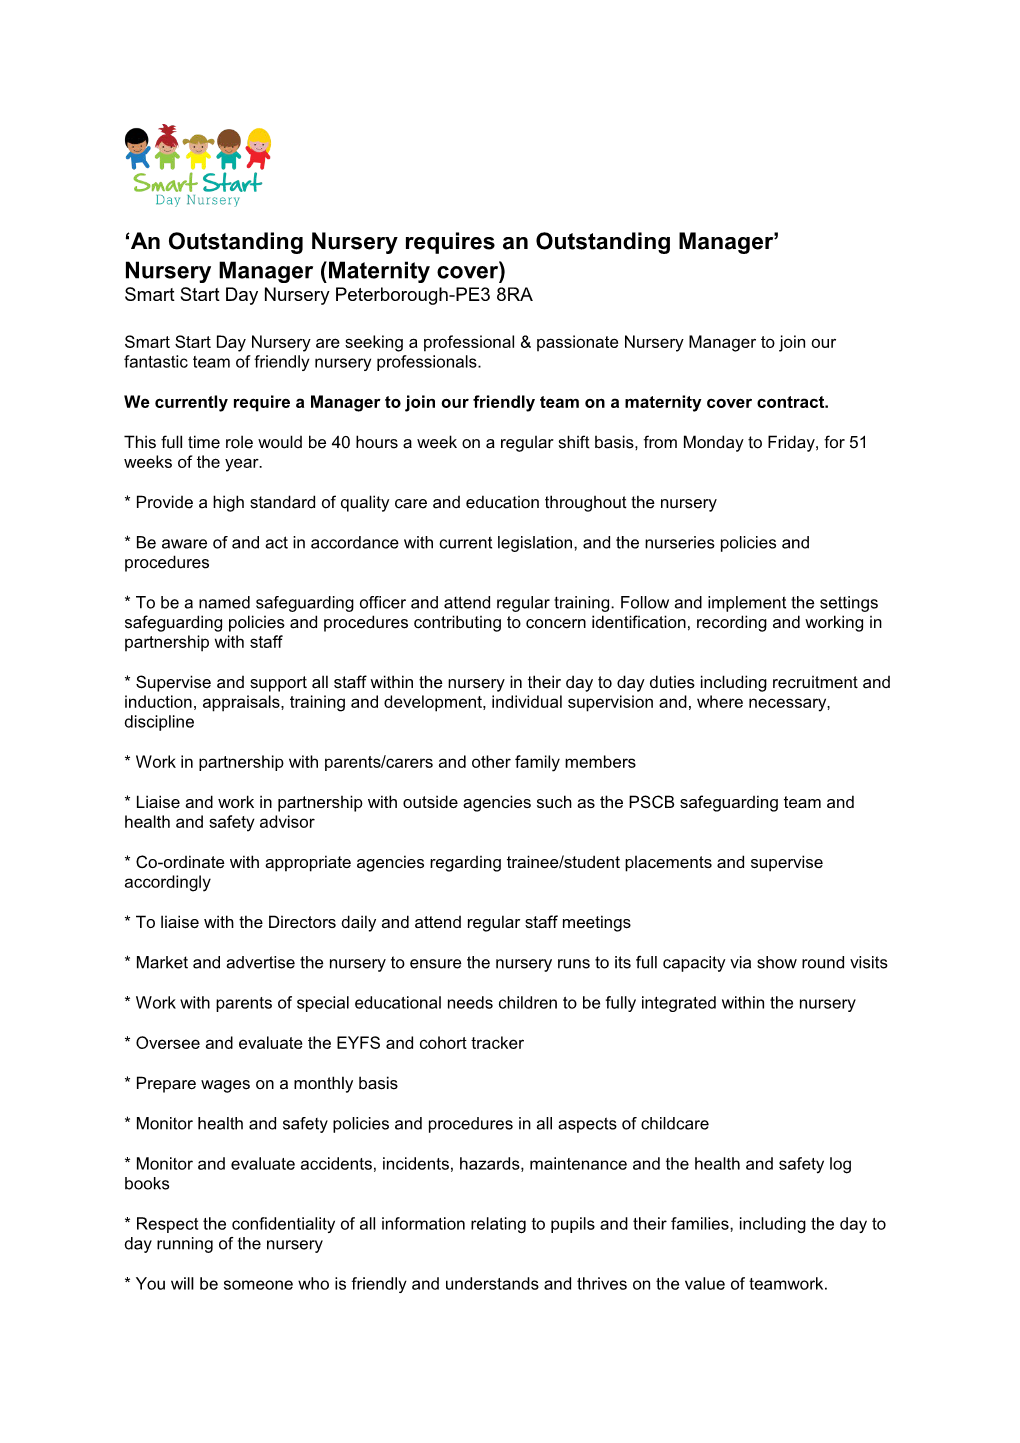 An Outstanding Nursery Requires an Outstanding Manager